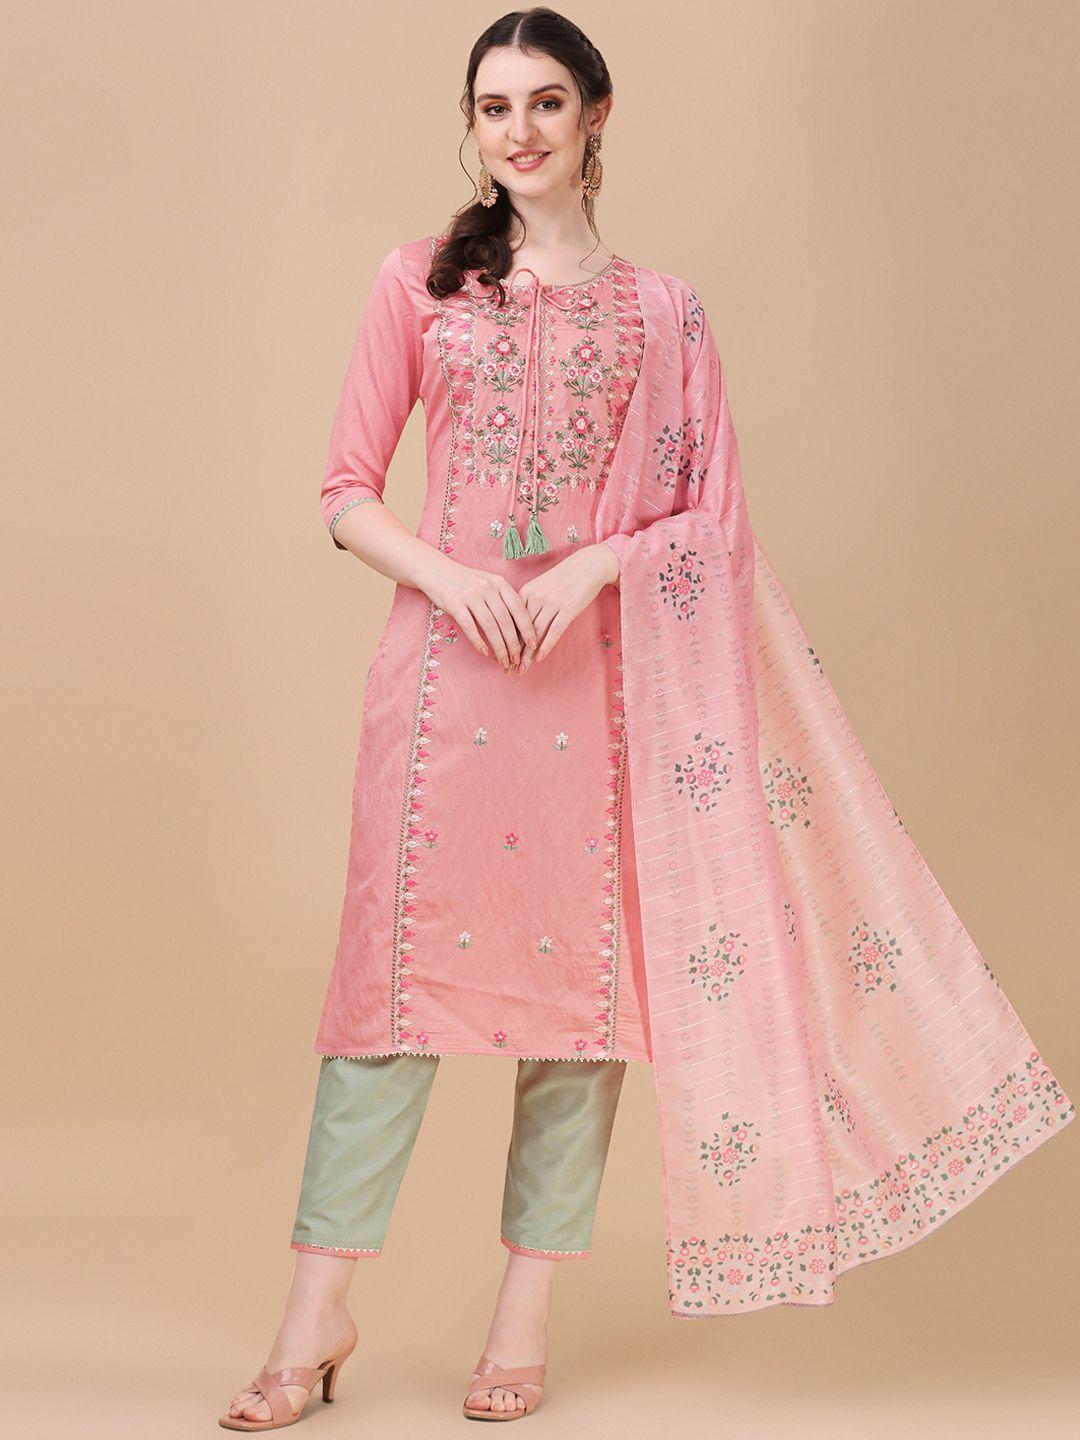 berrylicious pink floral embroidered thread work chanderi cotton kurta with trousers & dupatta